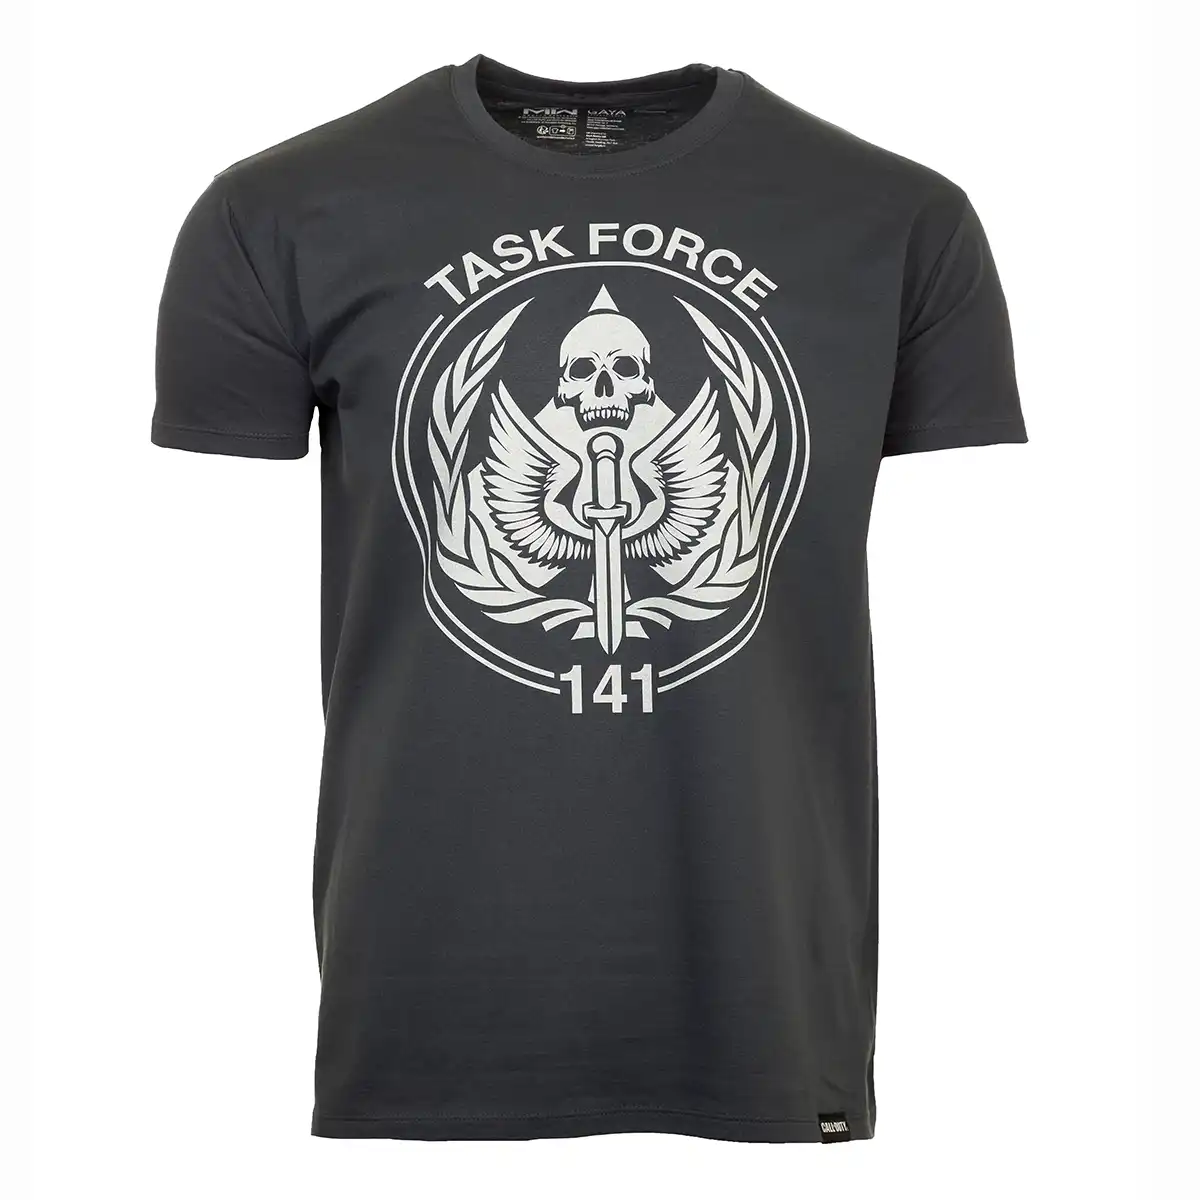 Call of Duty T-Shirt "Task Force Icon" Mousegrey L